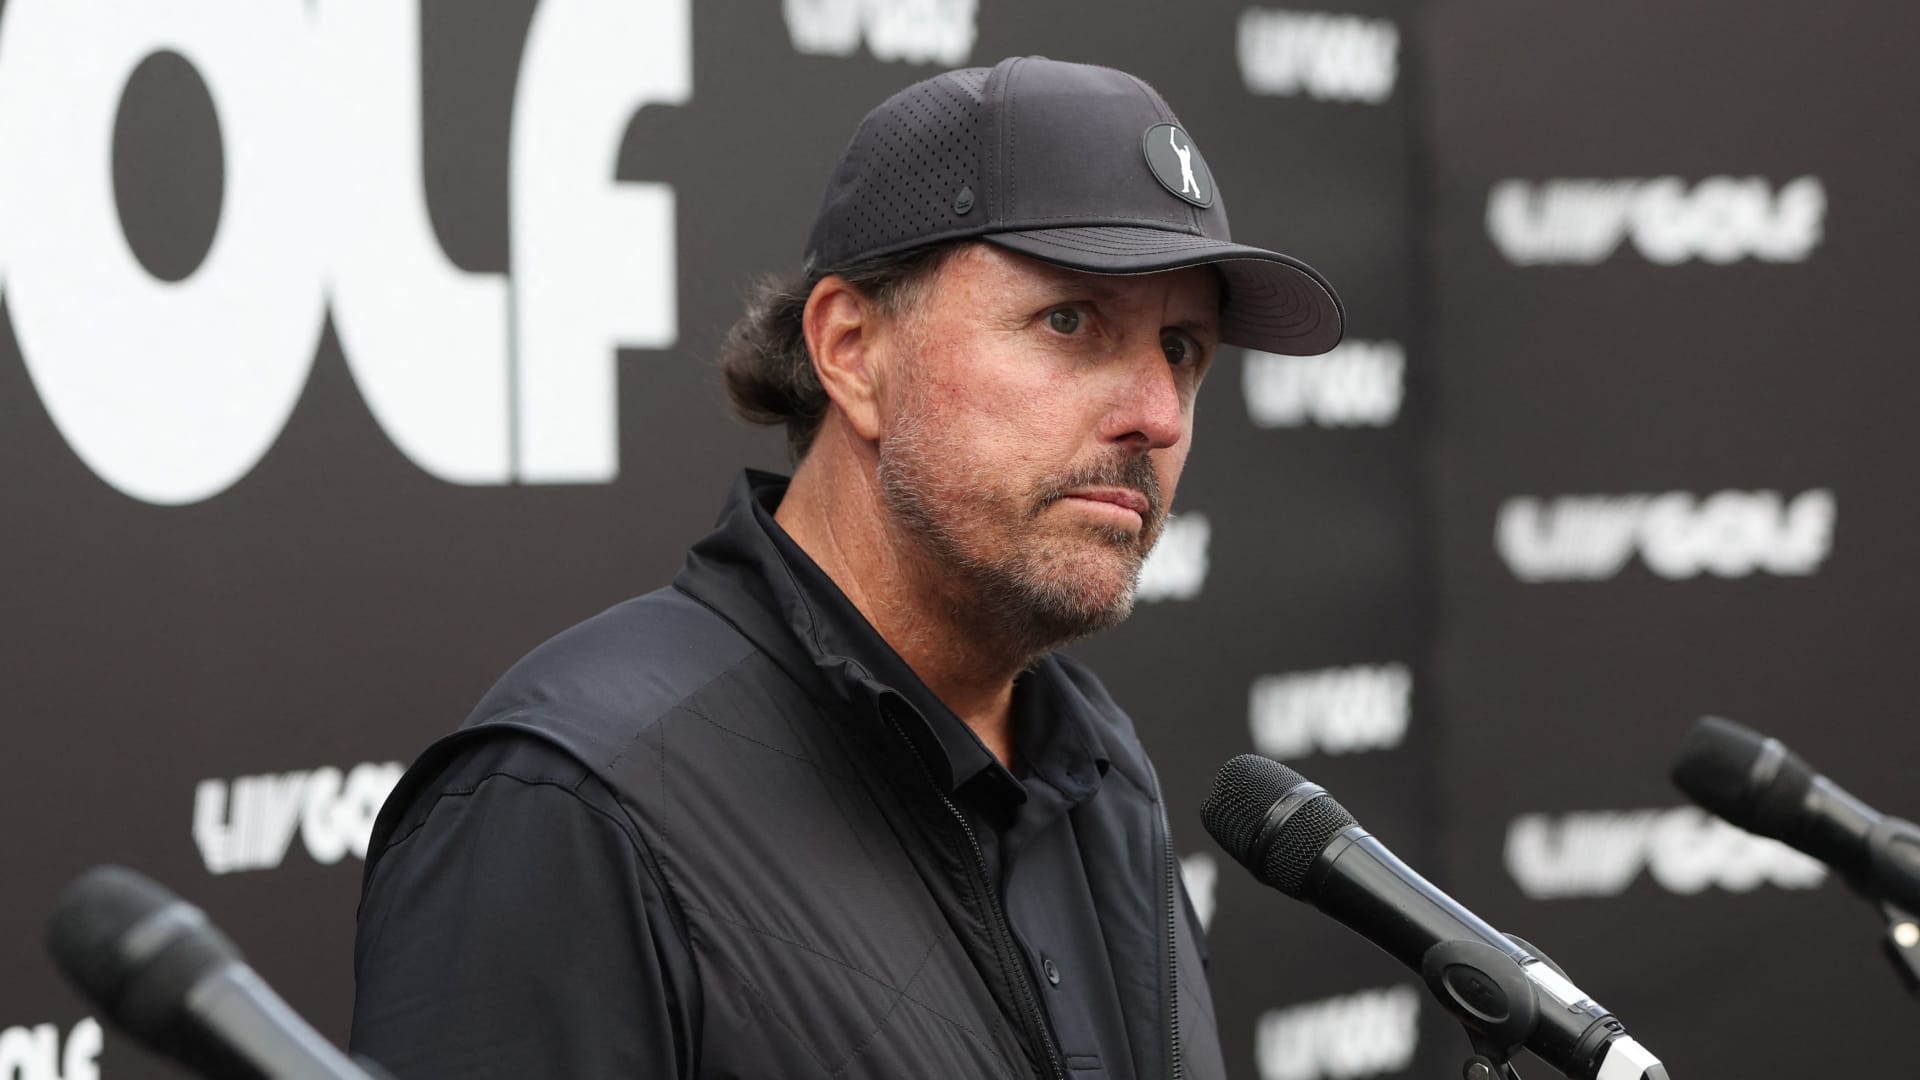 Mickelson, LIV golfers sue PGA Tour over suspensions